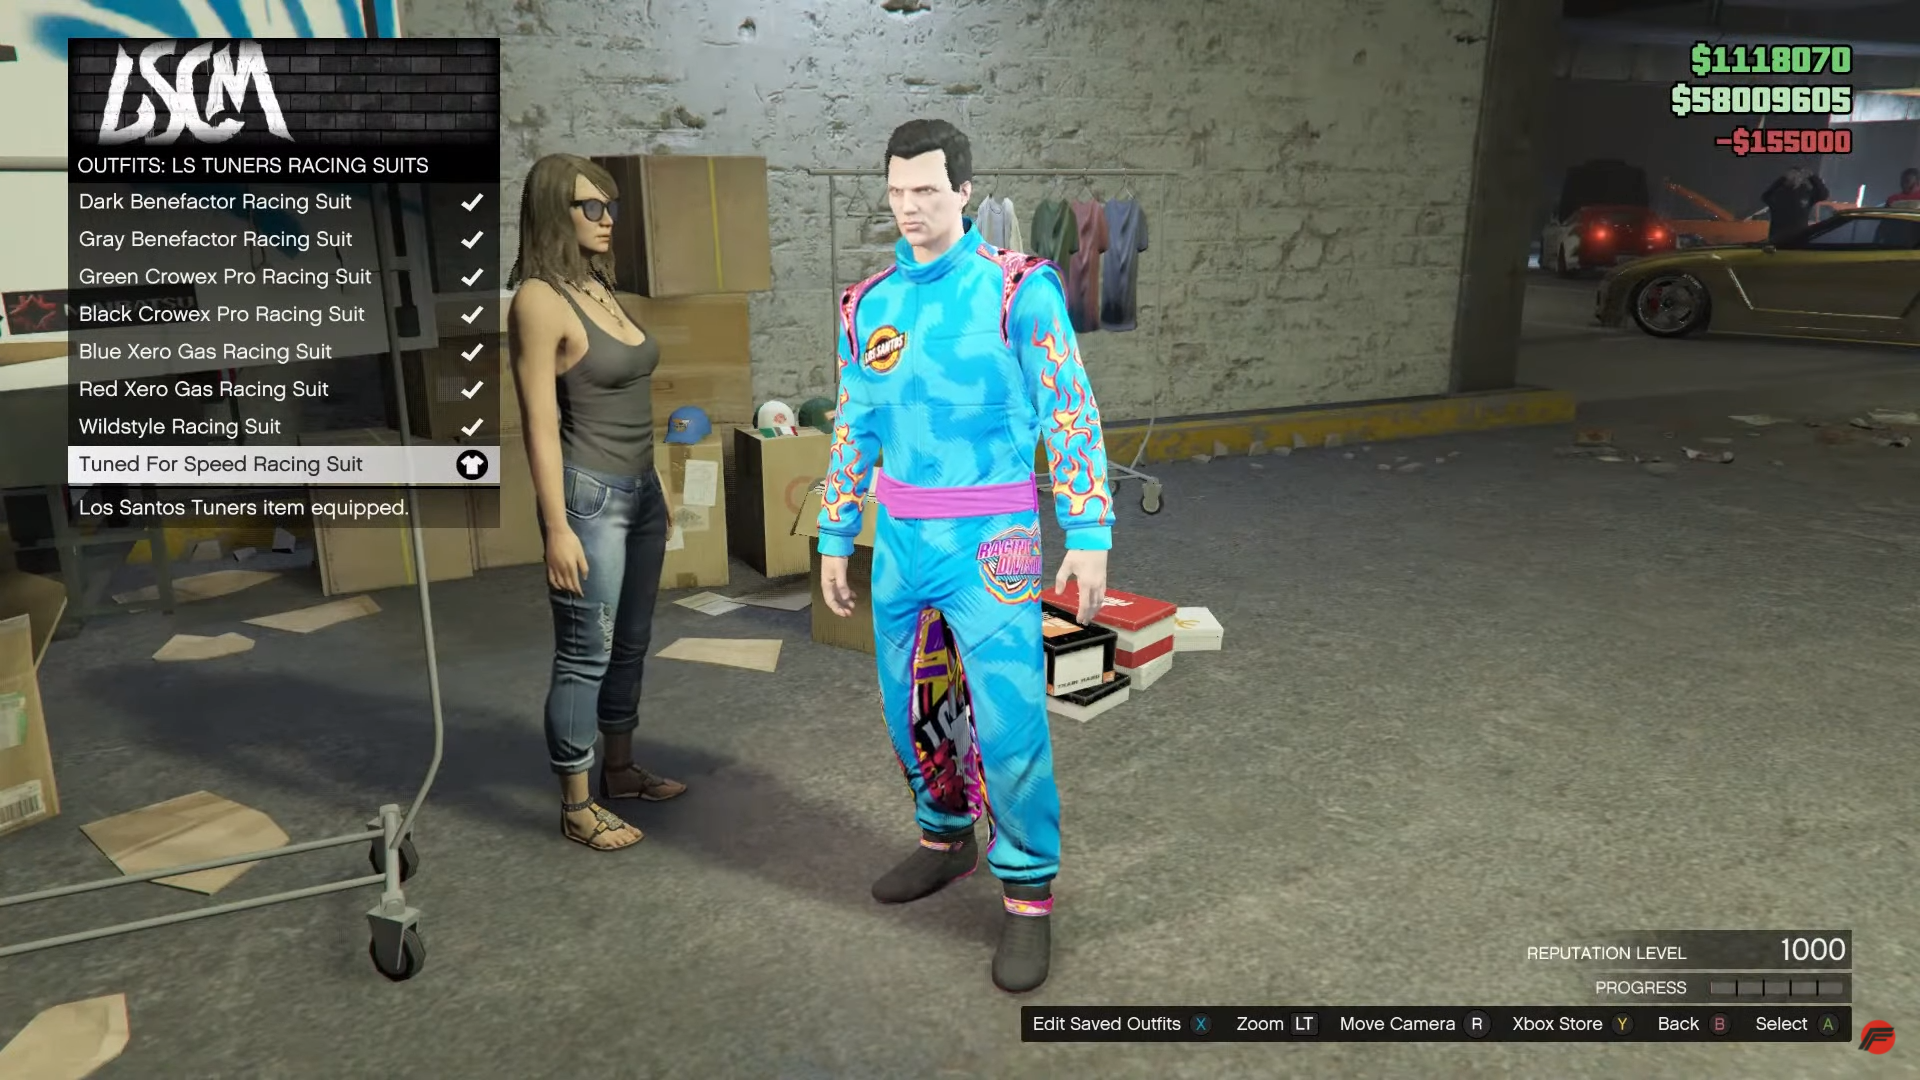 How to level up fast in GTA Online and earn reputation